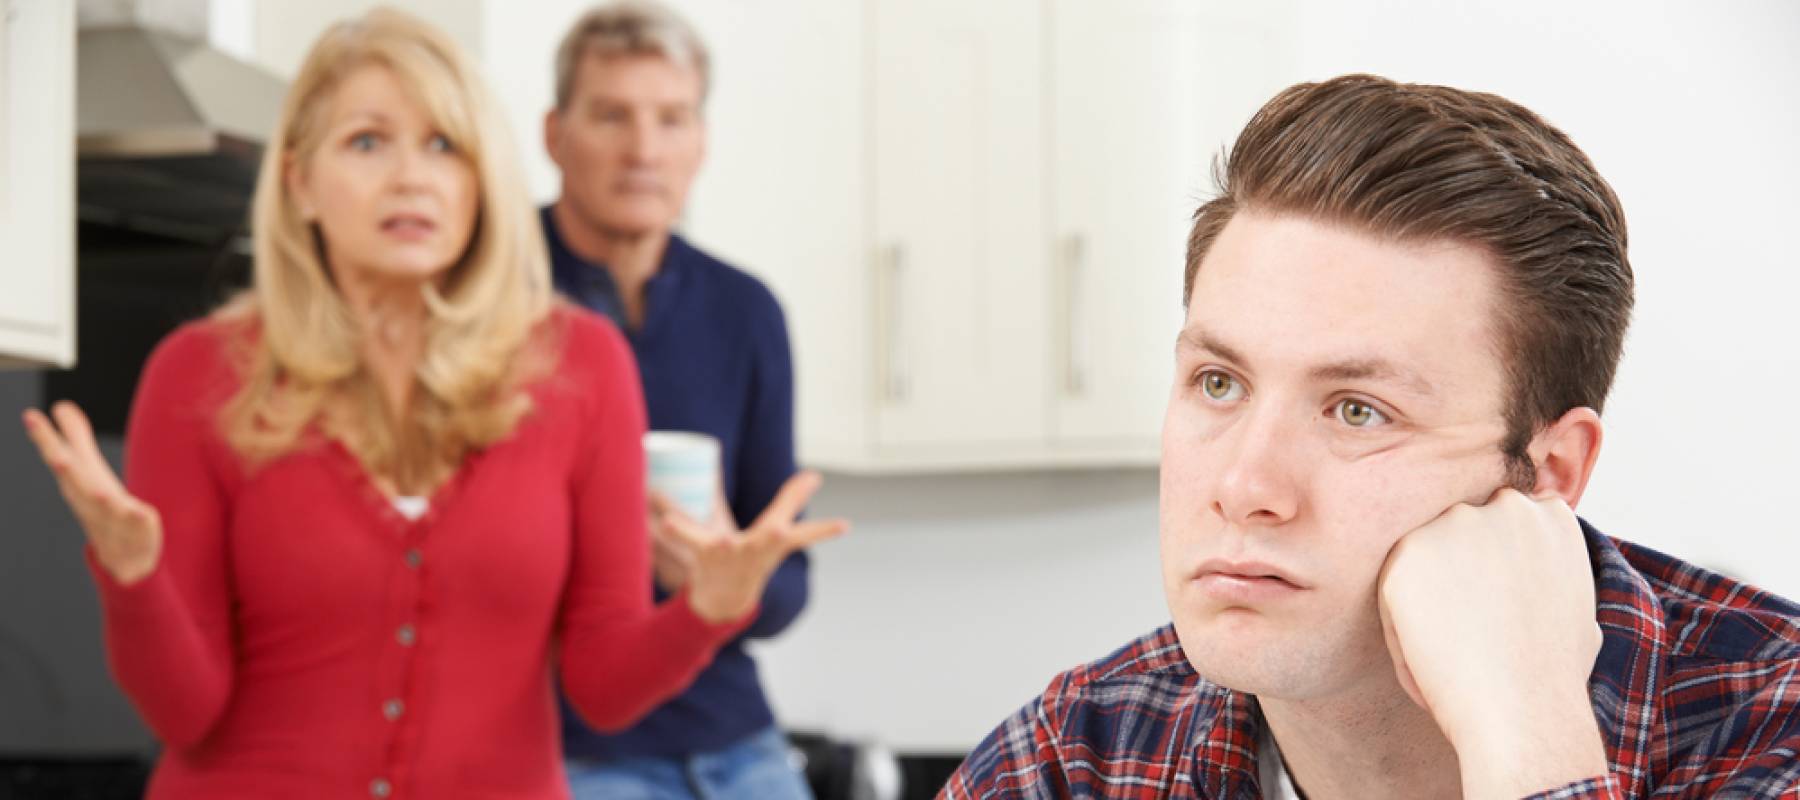 Mature Parents Frustrated With Adult Son Living At Home.